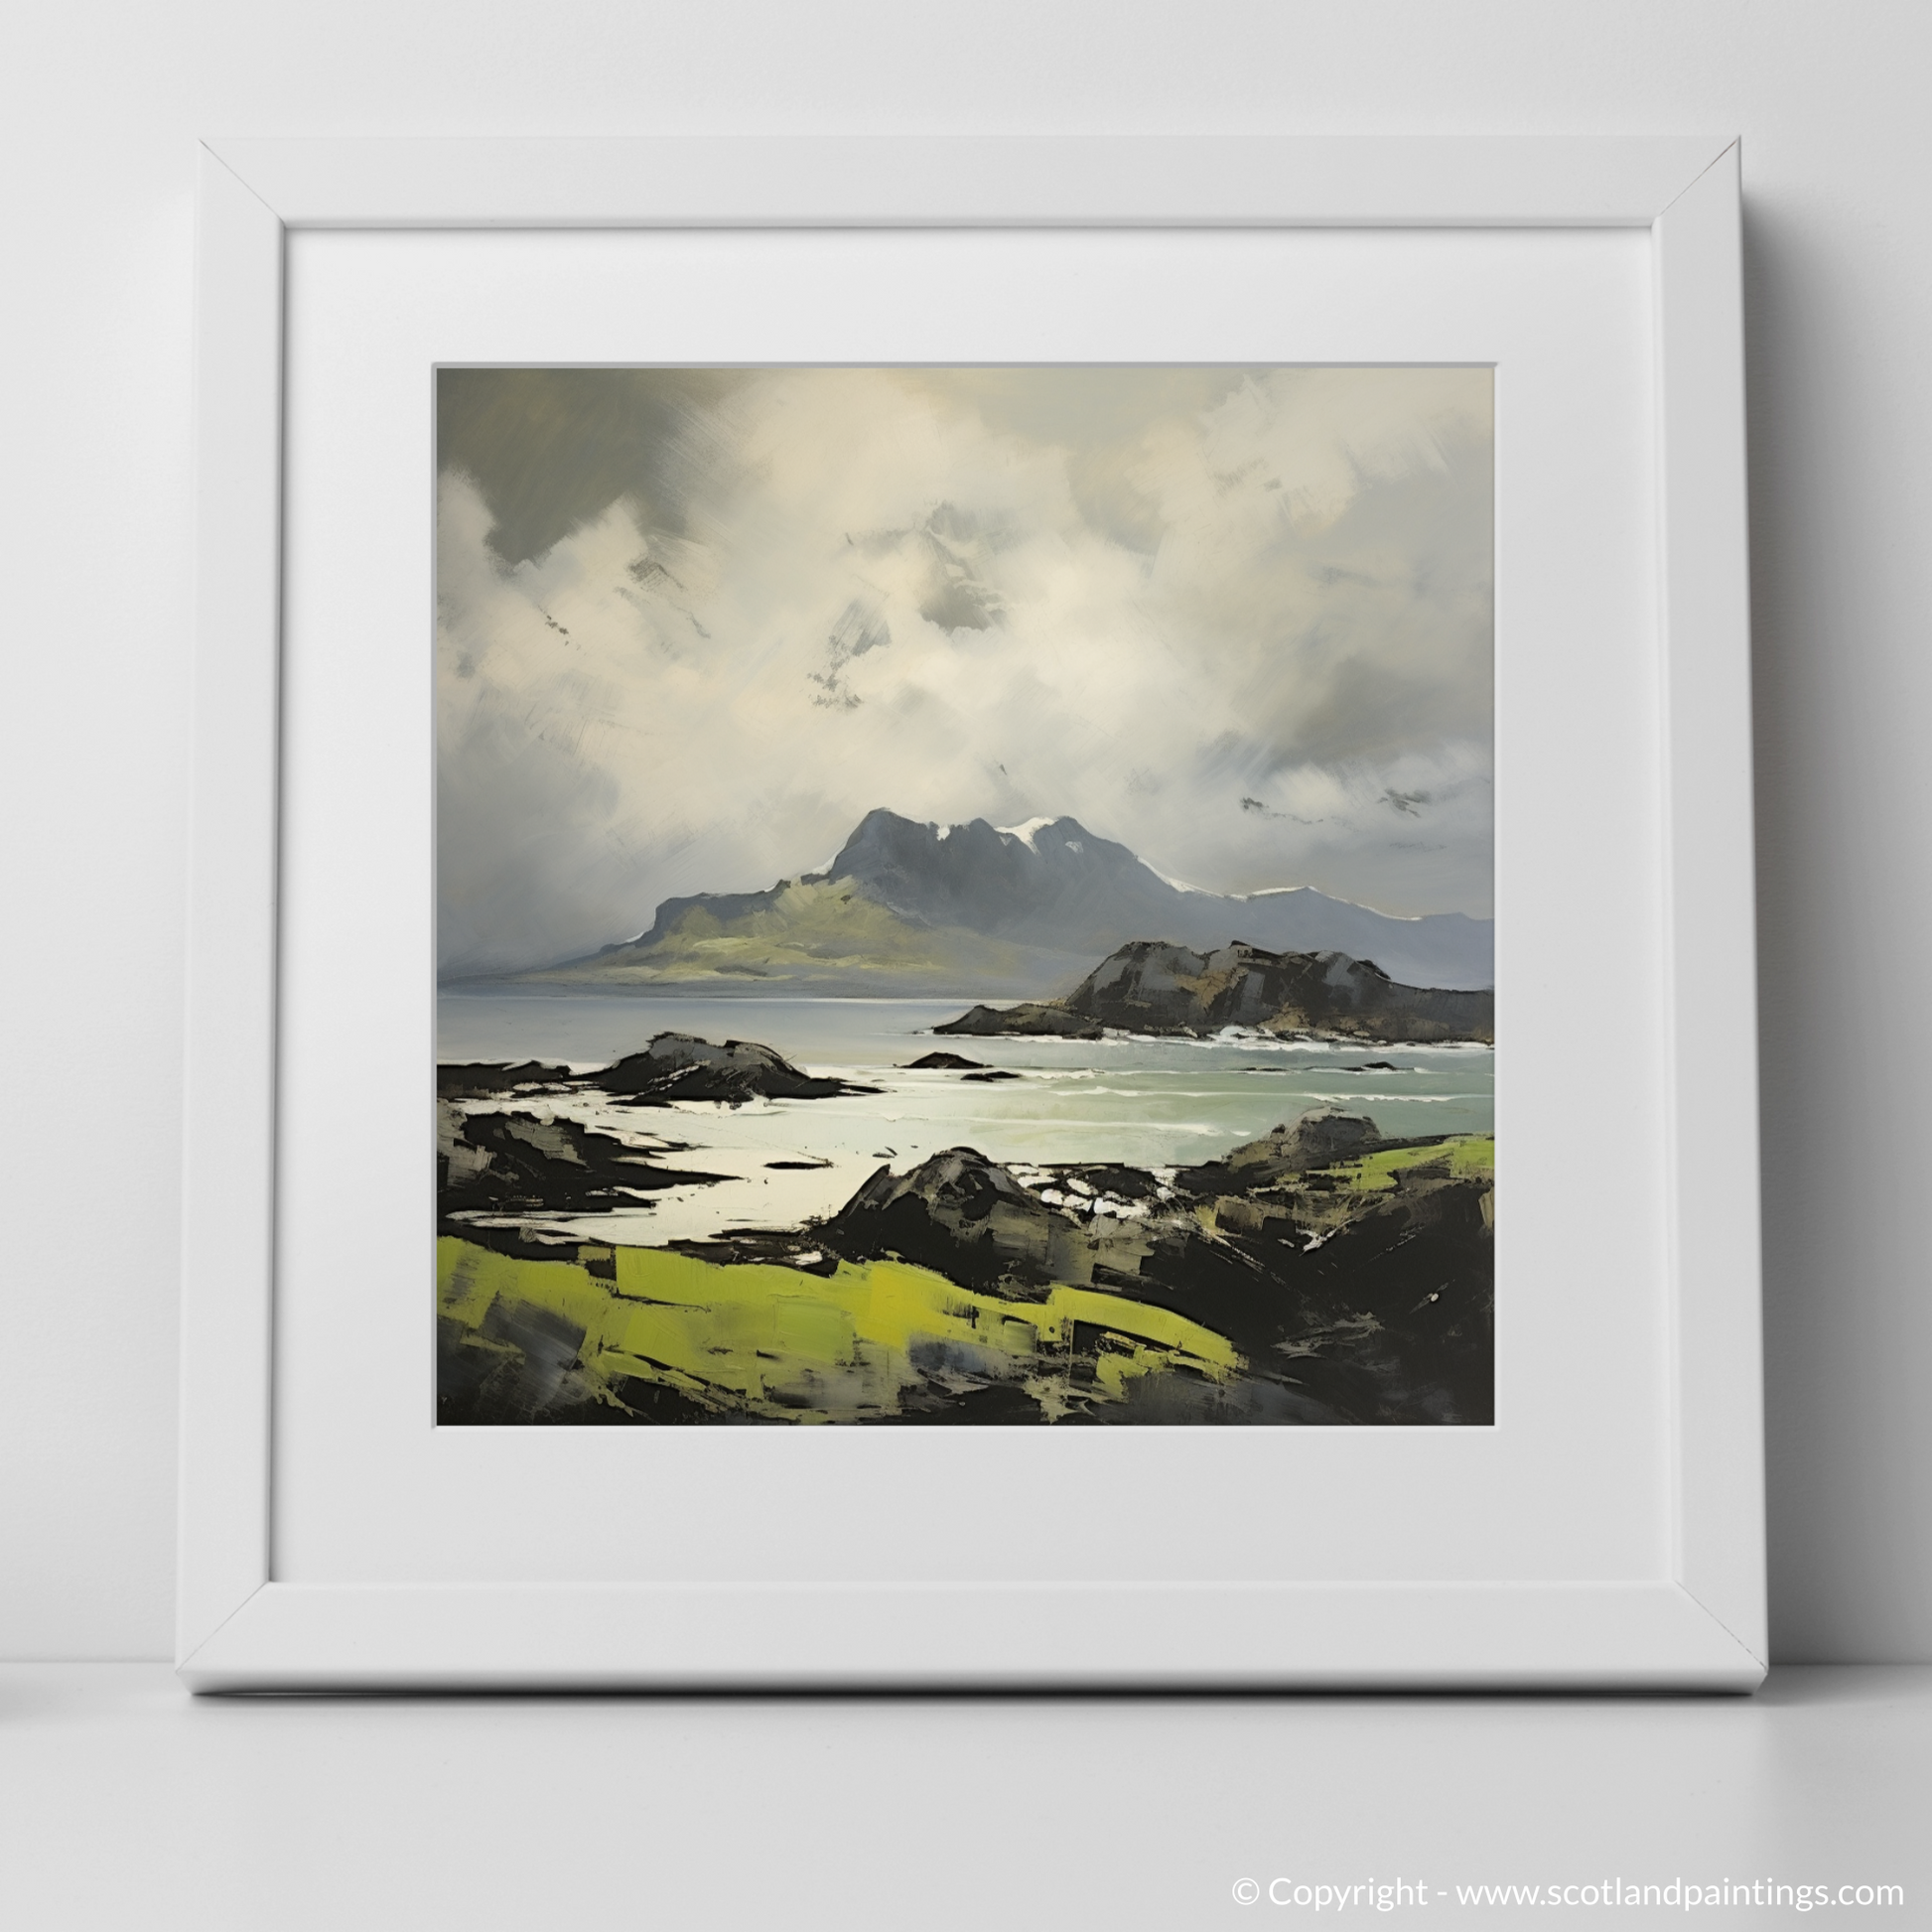 Art Print of Isle of Eigg, Inner Hebrides with a white frame